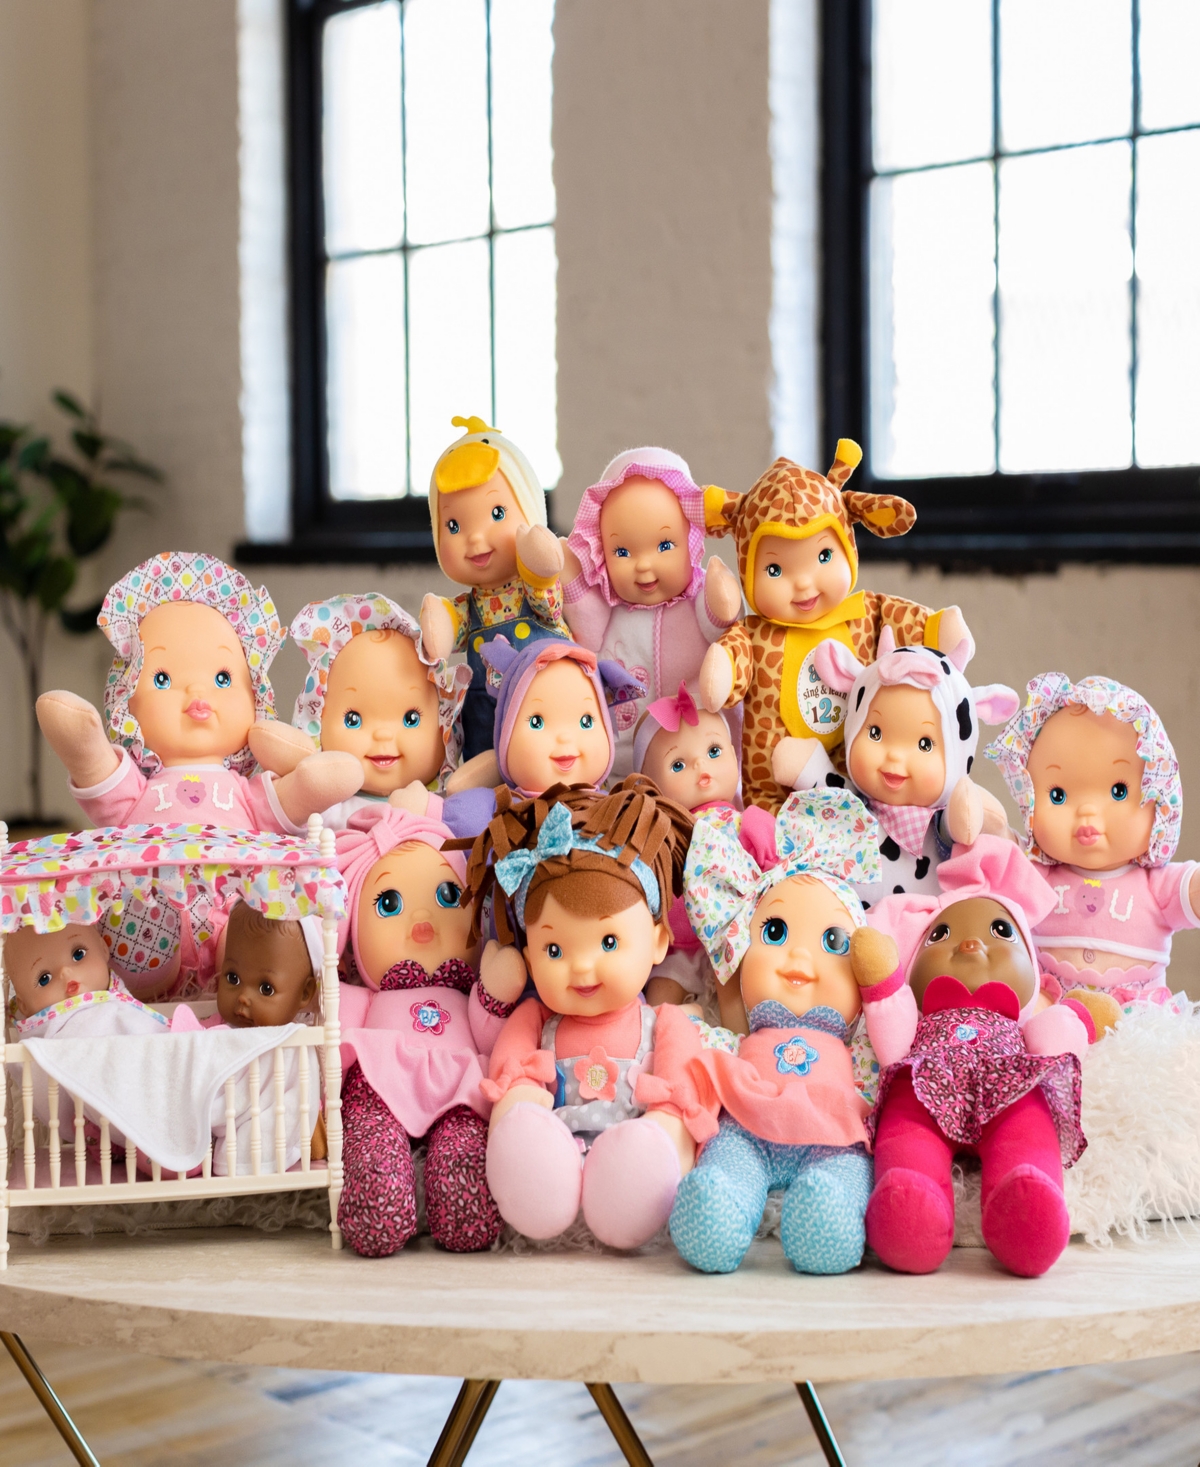 Shop Baby's First By Nemcor Goldberger Doll Kisses Bi-lingual English And Spanish In Multi